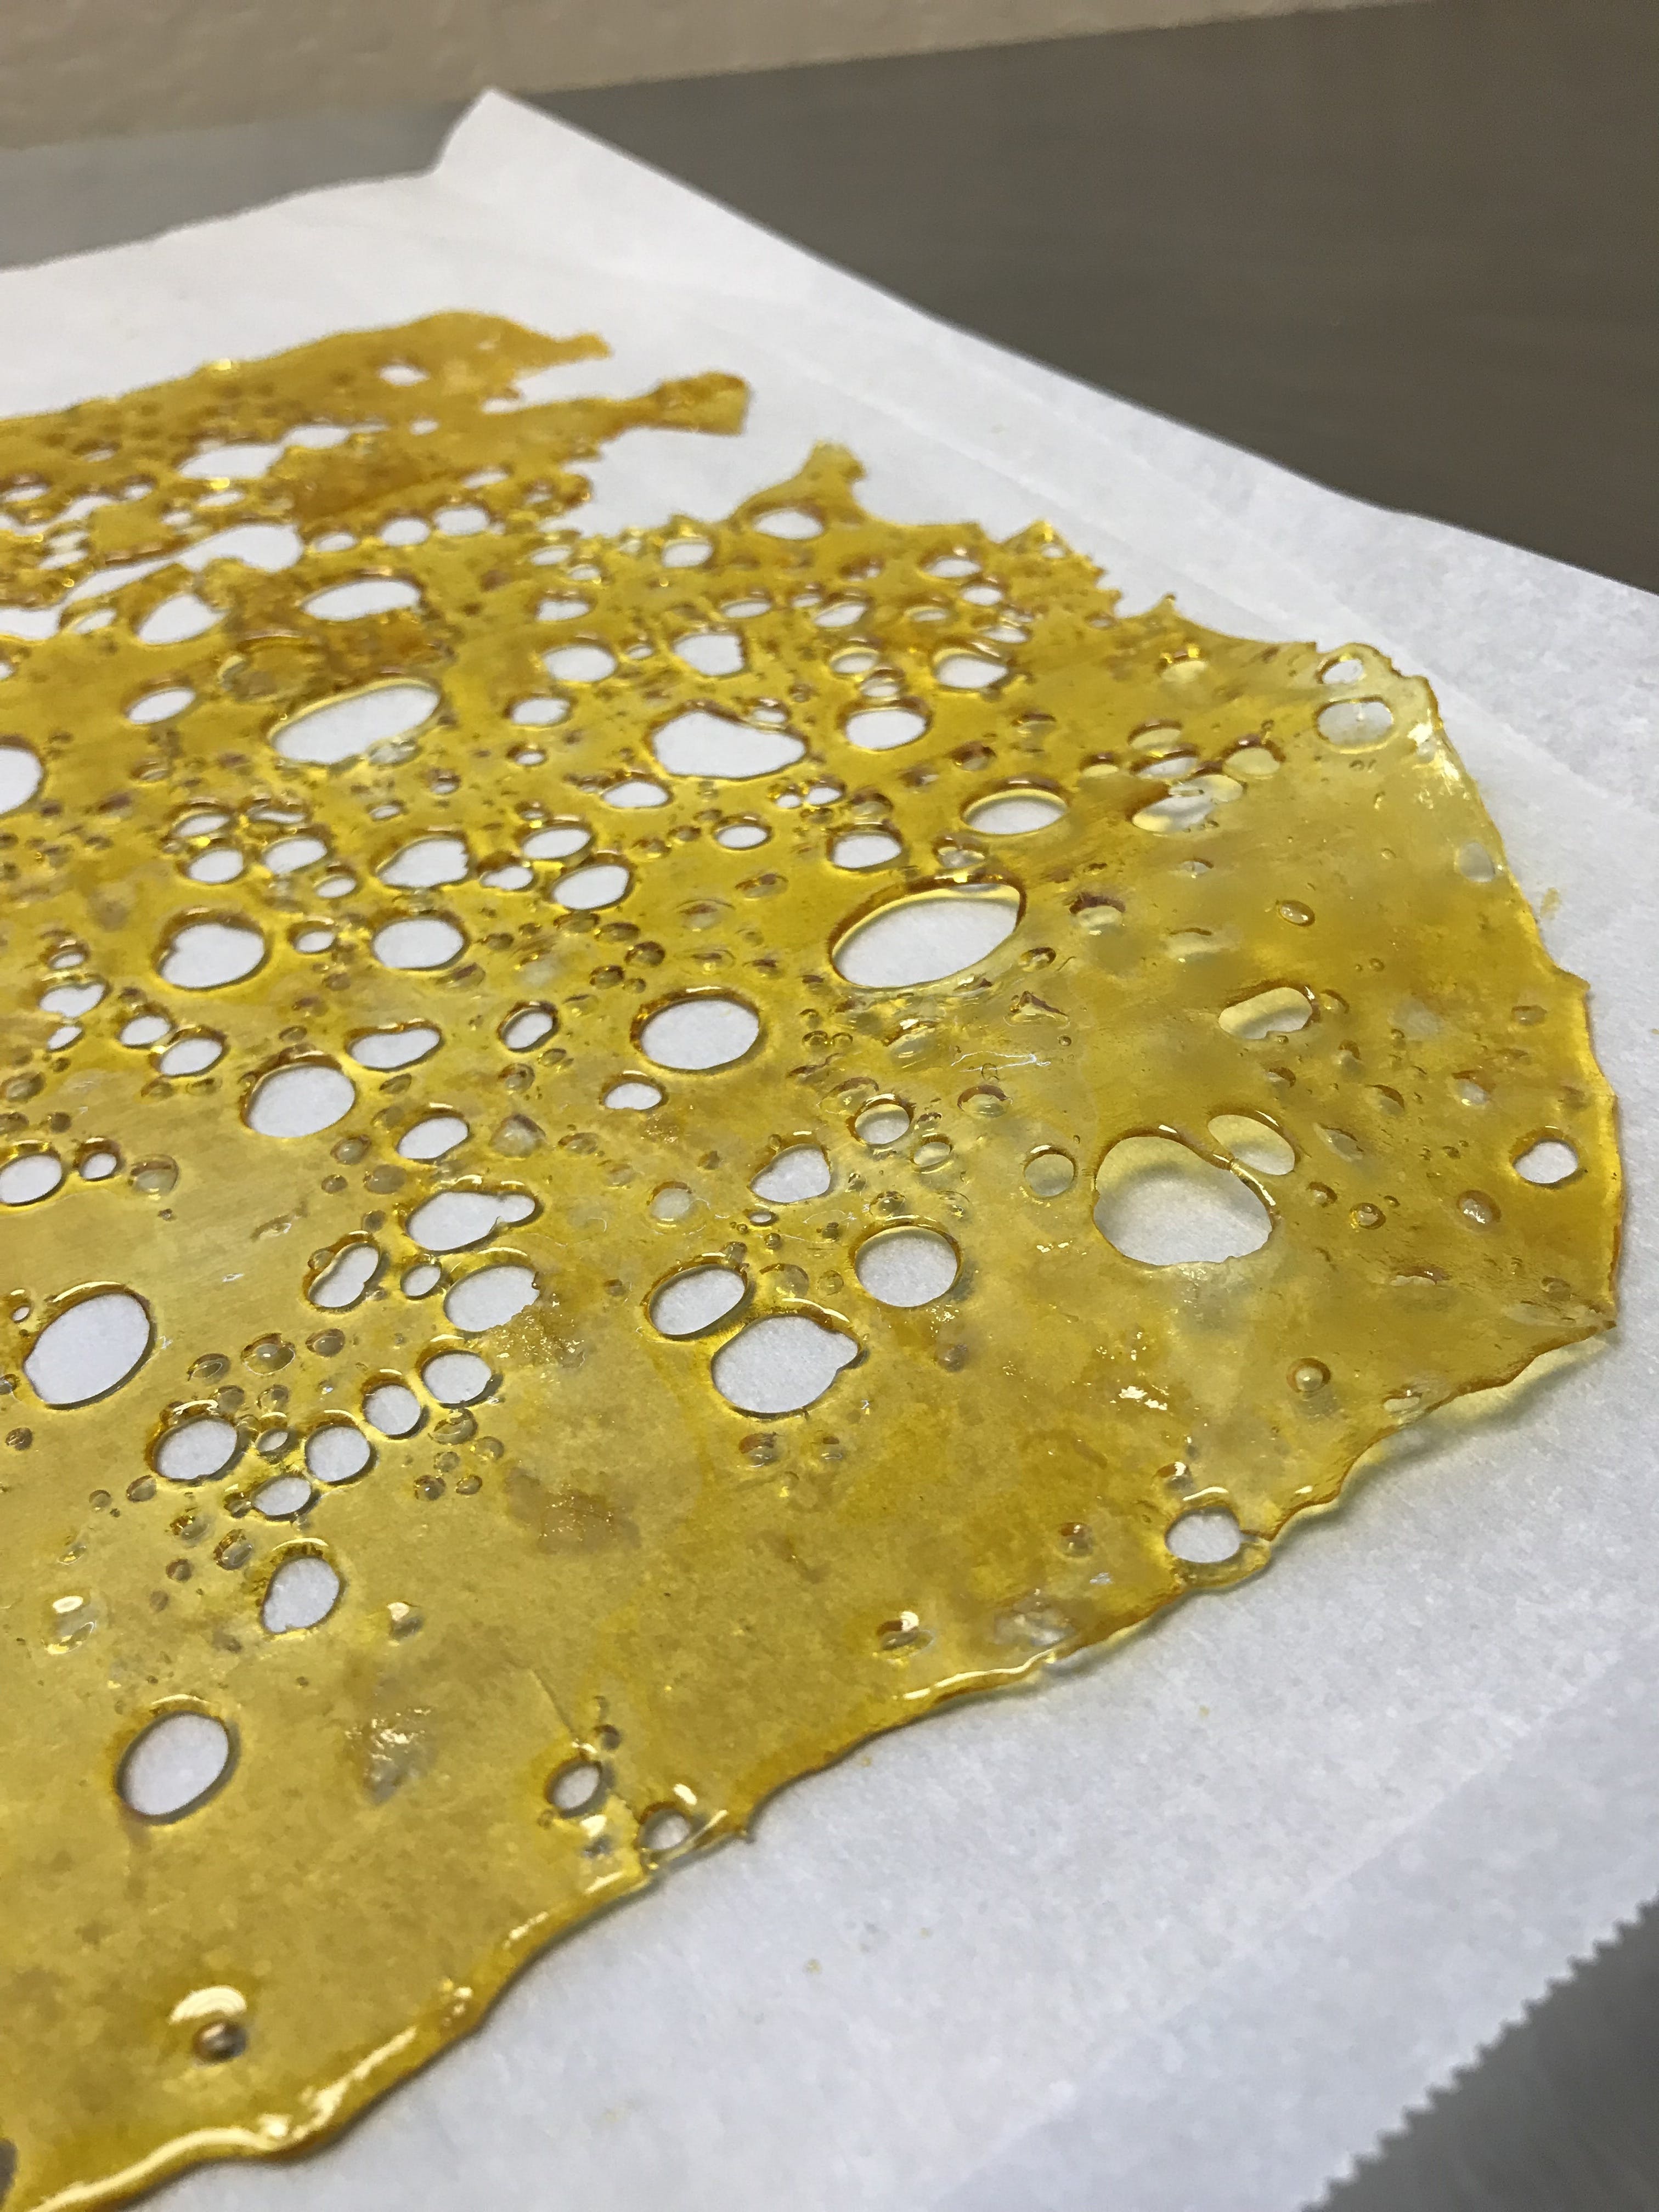 wax-sweet-science-live-resin-shatter-thin-mint